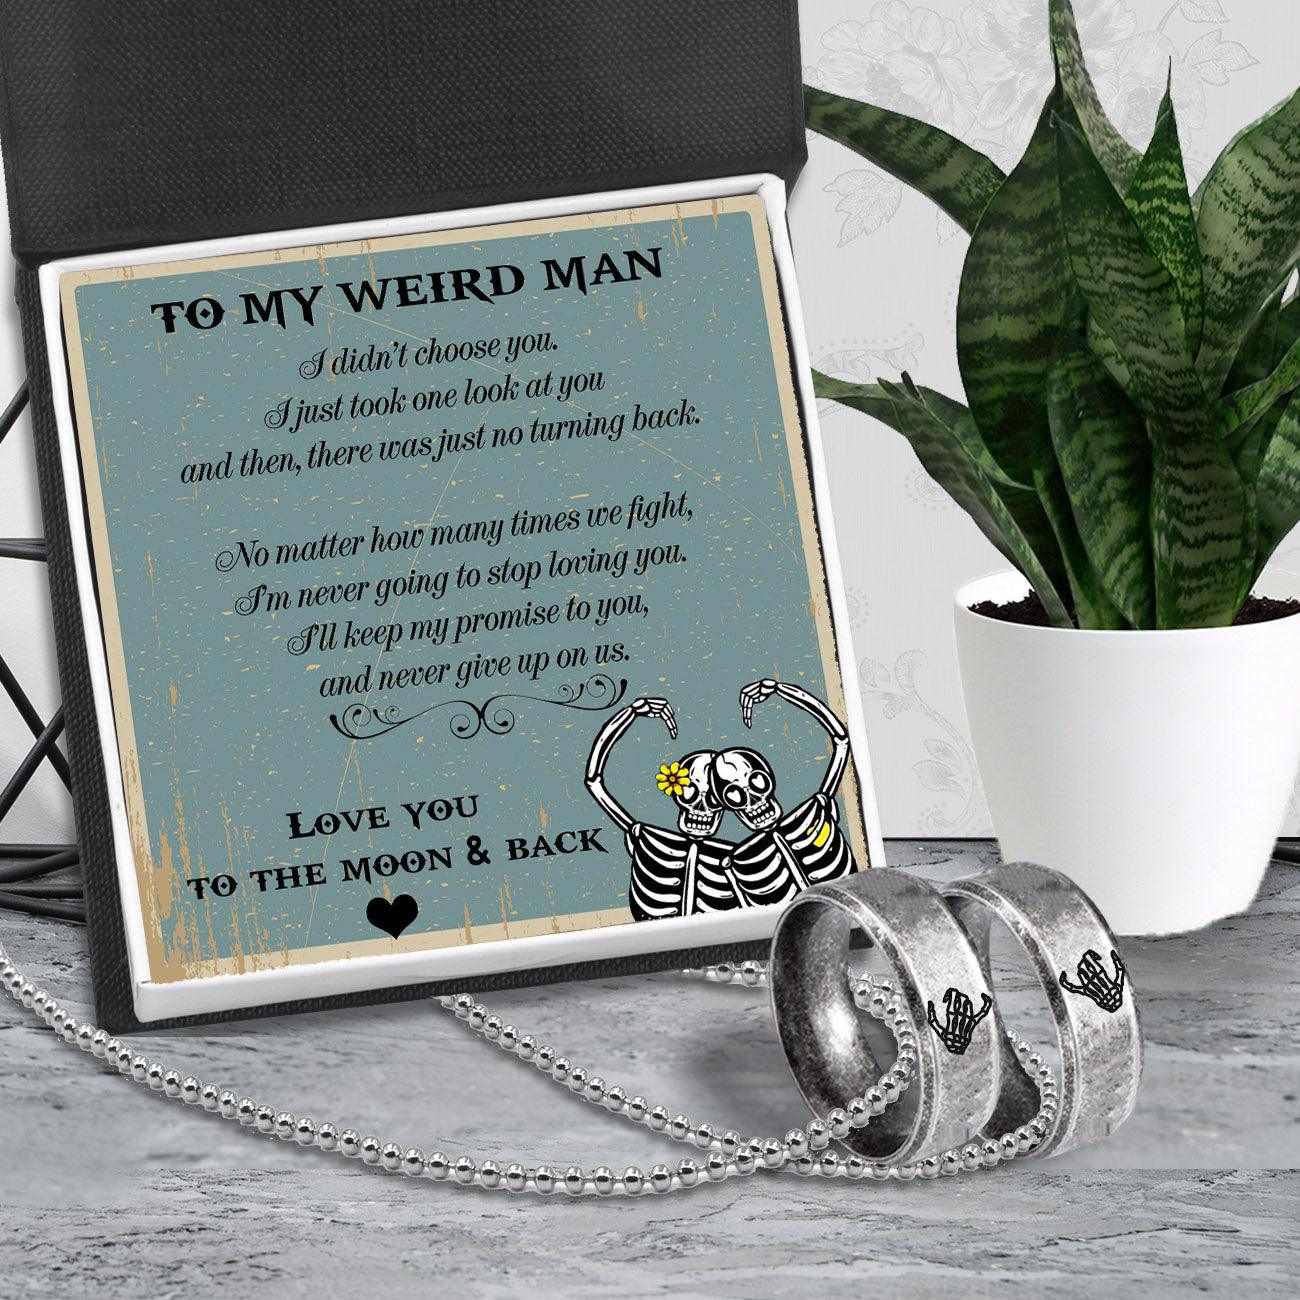 Skeleton Couple Ring Necklaces - Skull & Tatoo - To My Weird Man - Love You To The Moon & Back - Augndx26010 - Gifts Holder